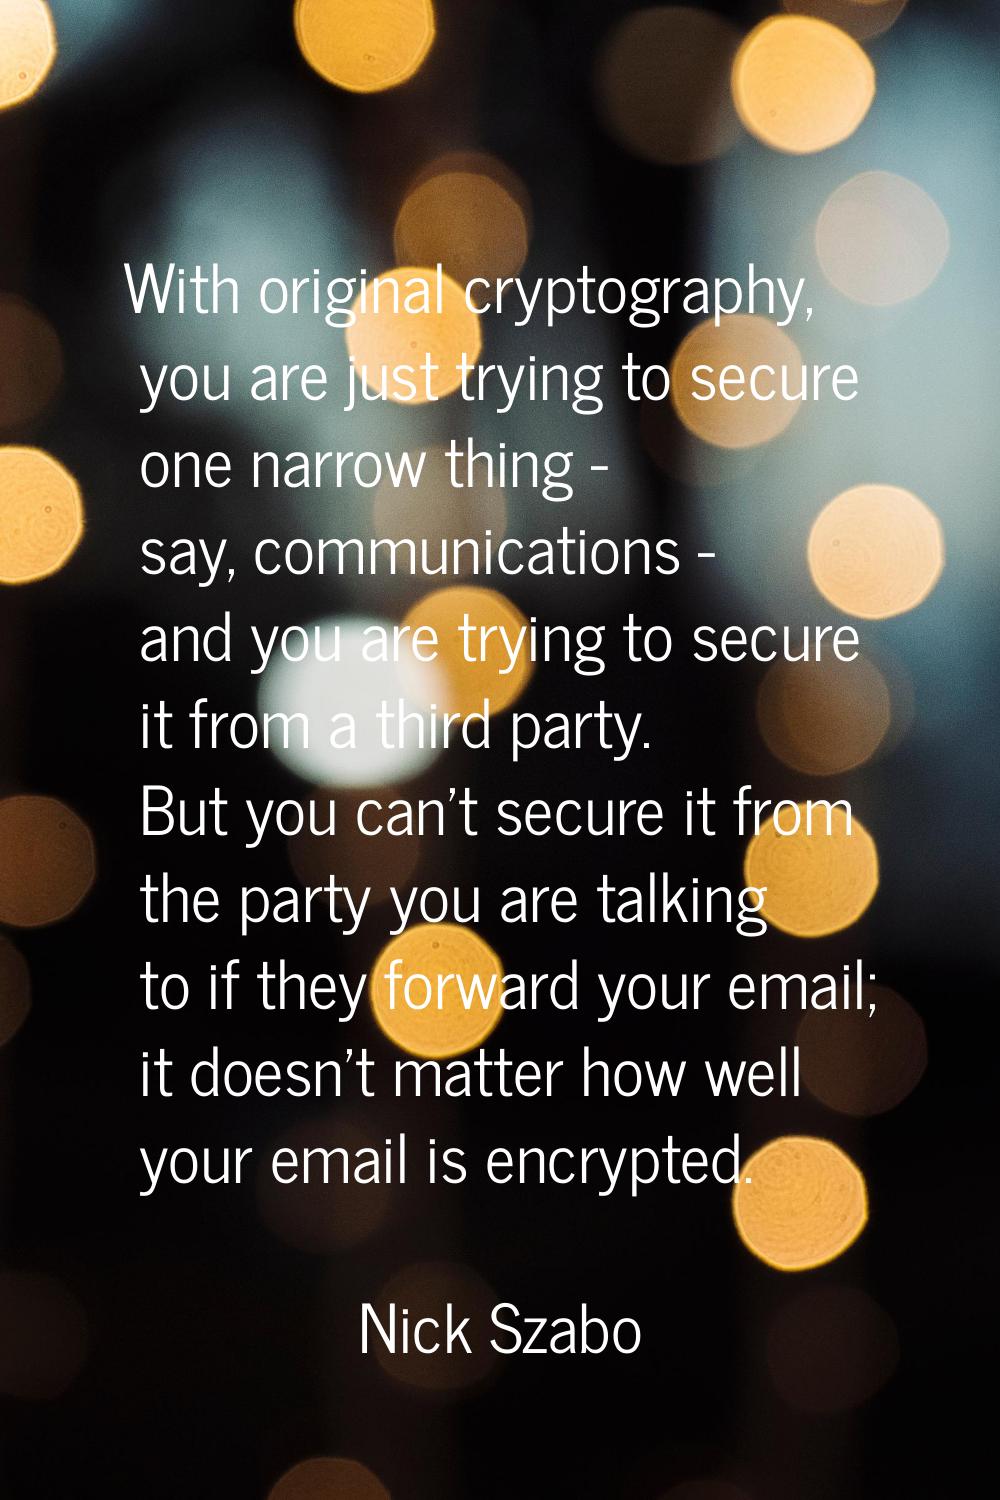 With original cryptography, you are just trying to secure one narrow thing - say, communications - 